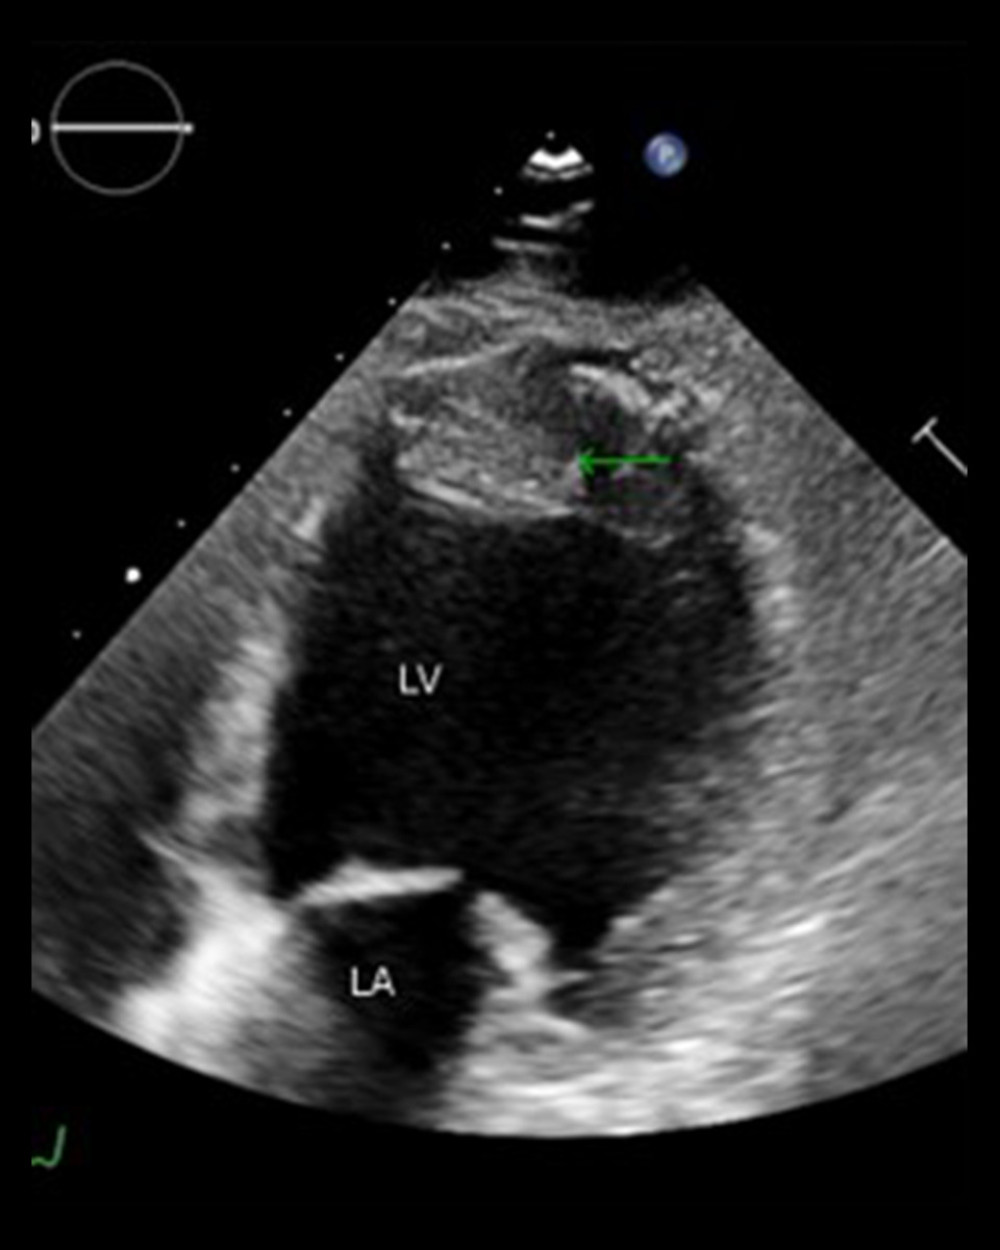 Echocardiography modified 4-chamber view showed large left ventricular apical thrombus in size of 20×15 mm (green arrow). LV – left ventricle; LA – left atrium.